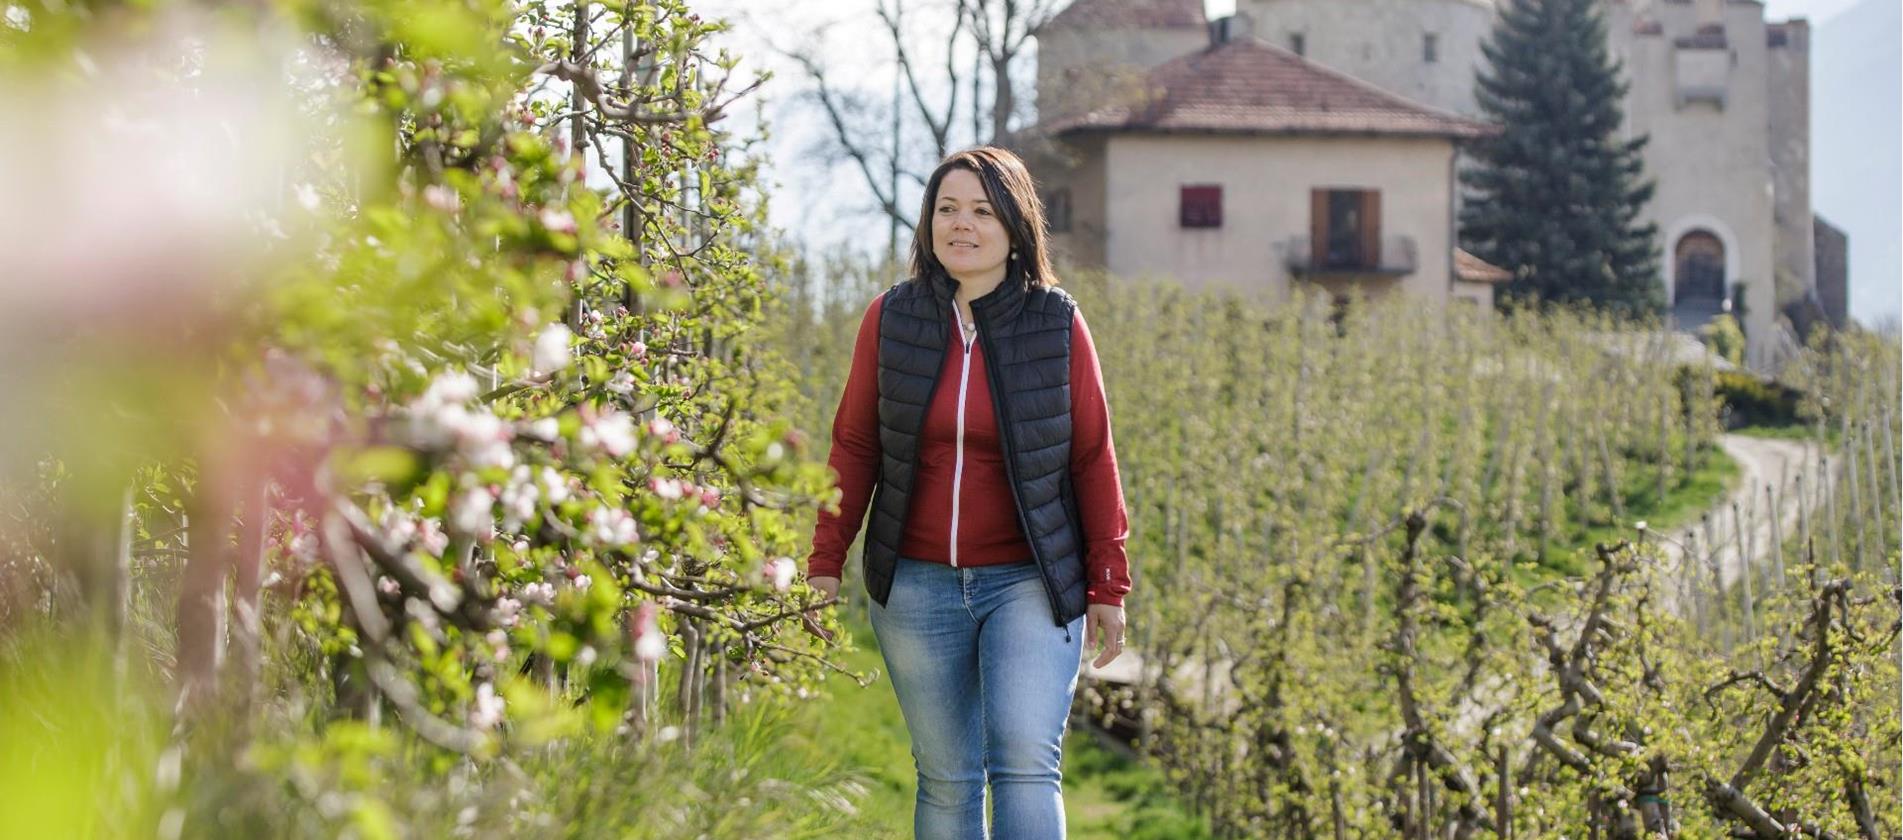 Apple farmer Maria Tappeiner in the orchard